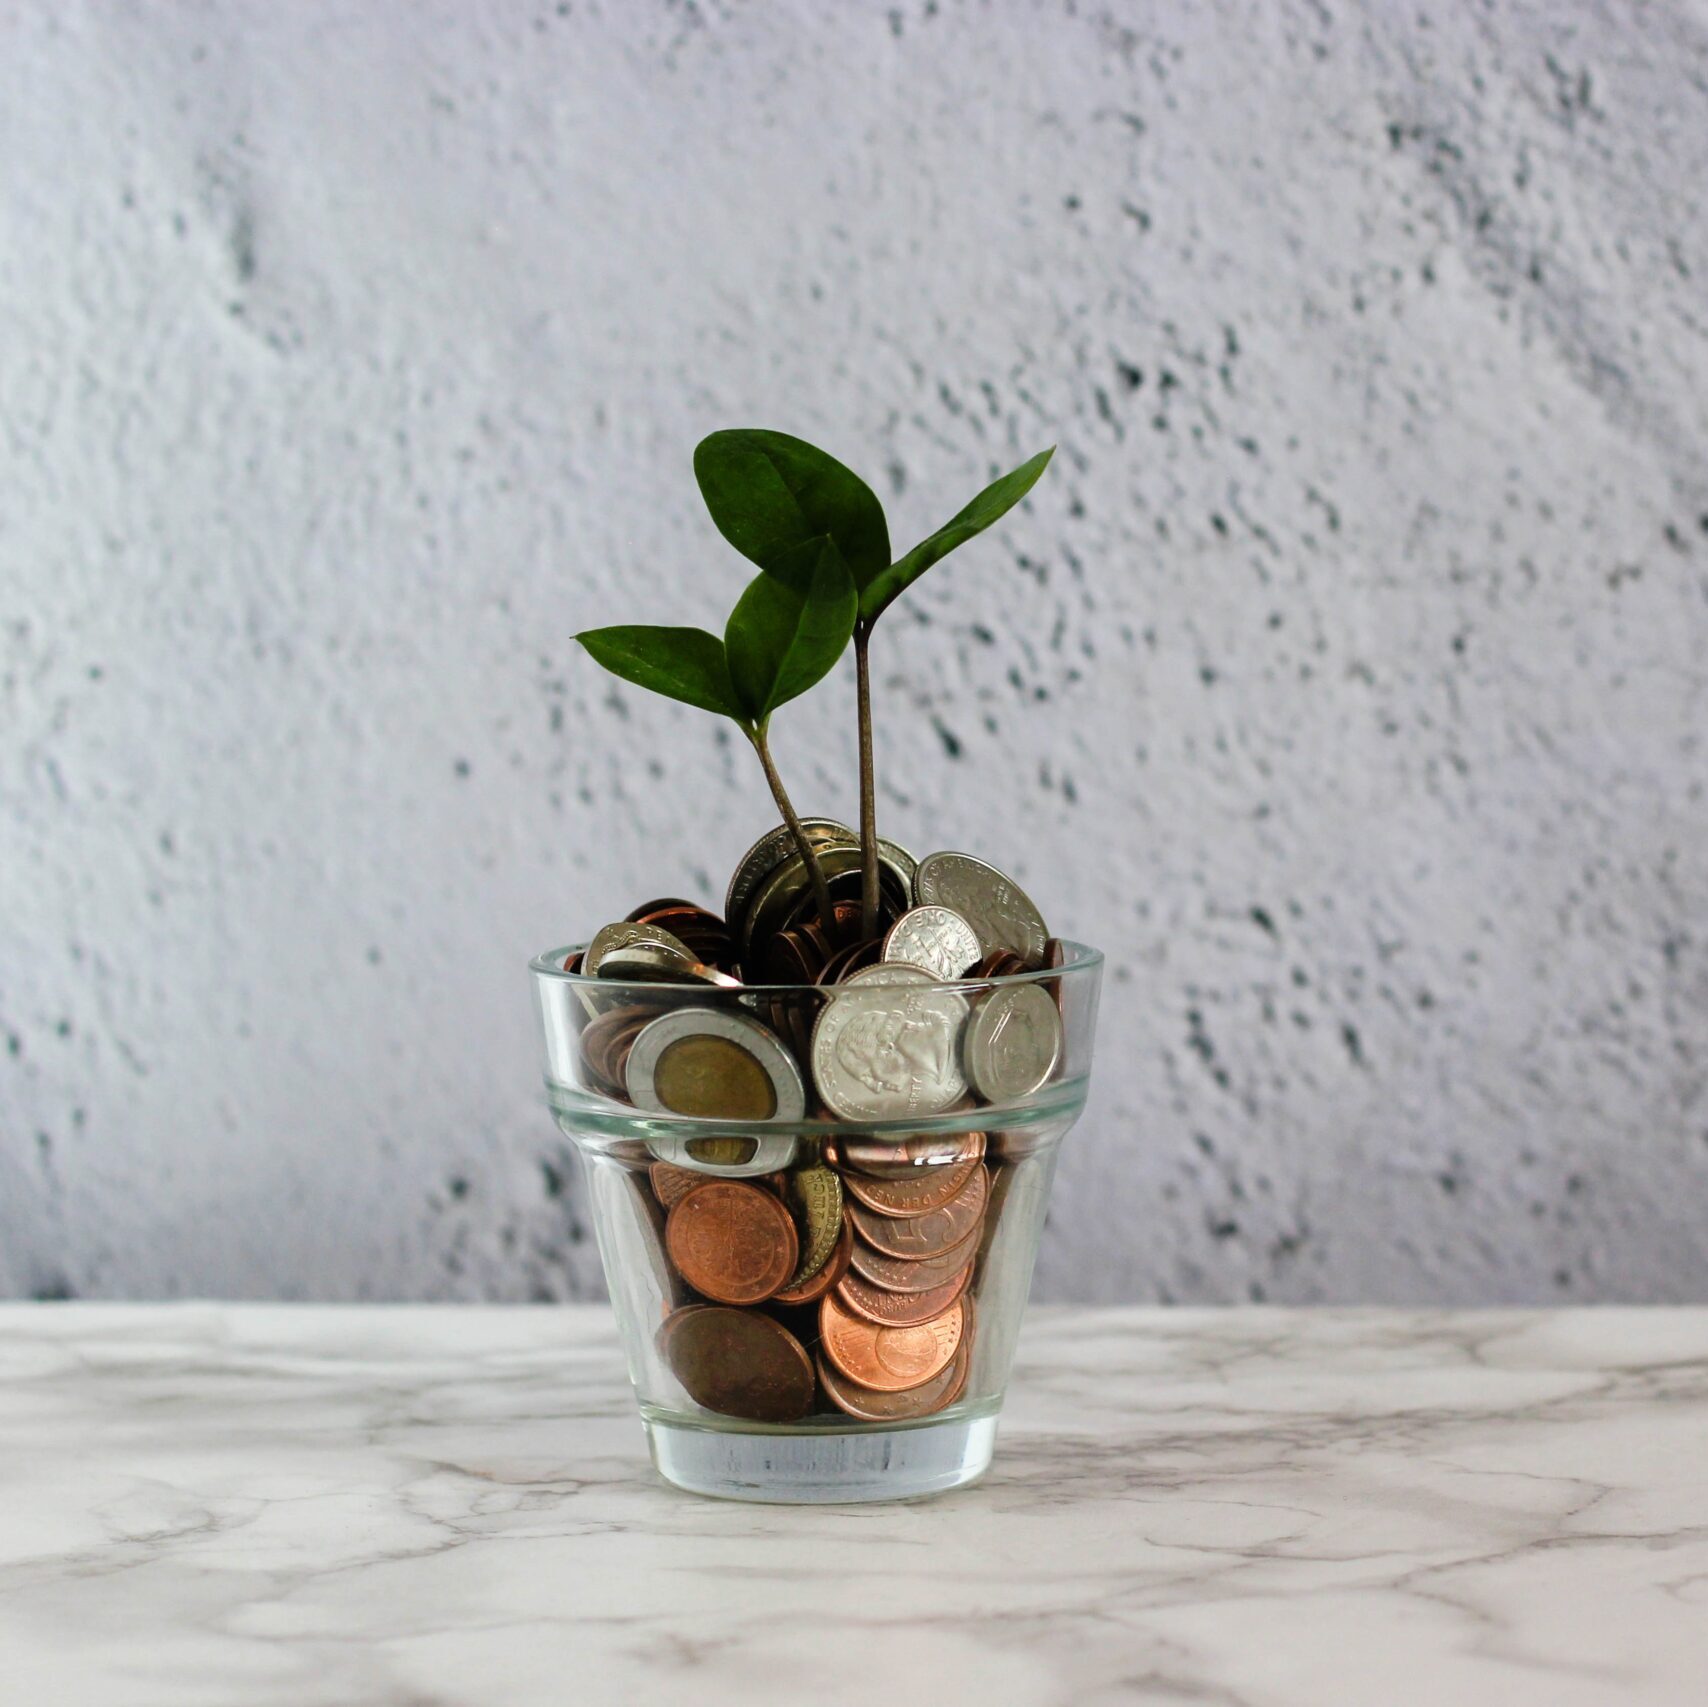 A plant with coins instead of soil